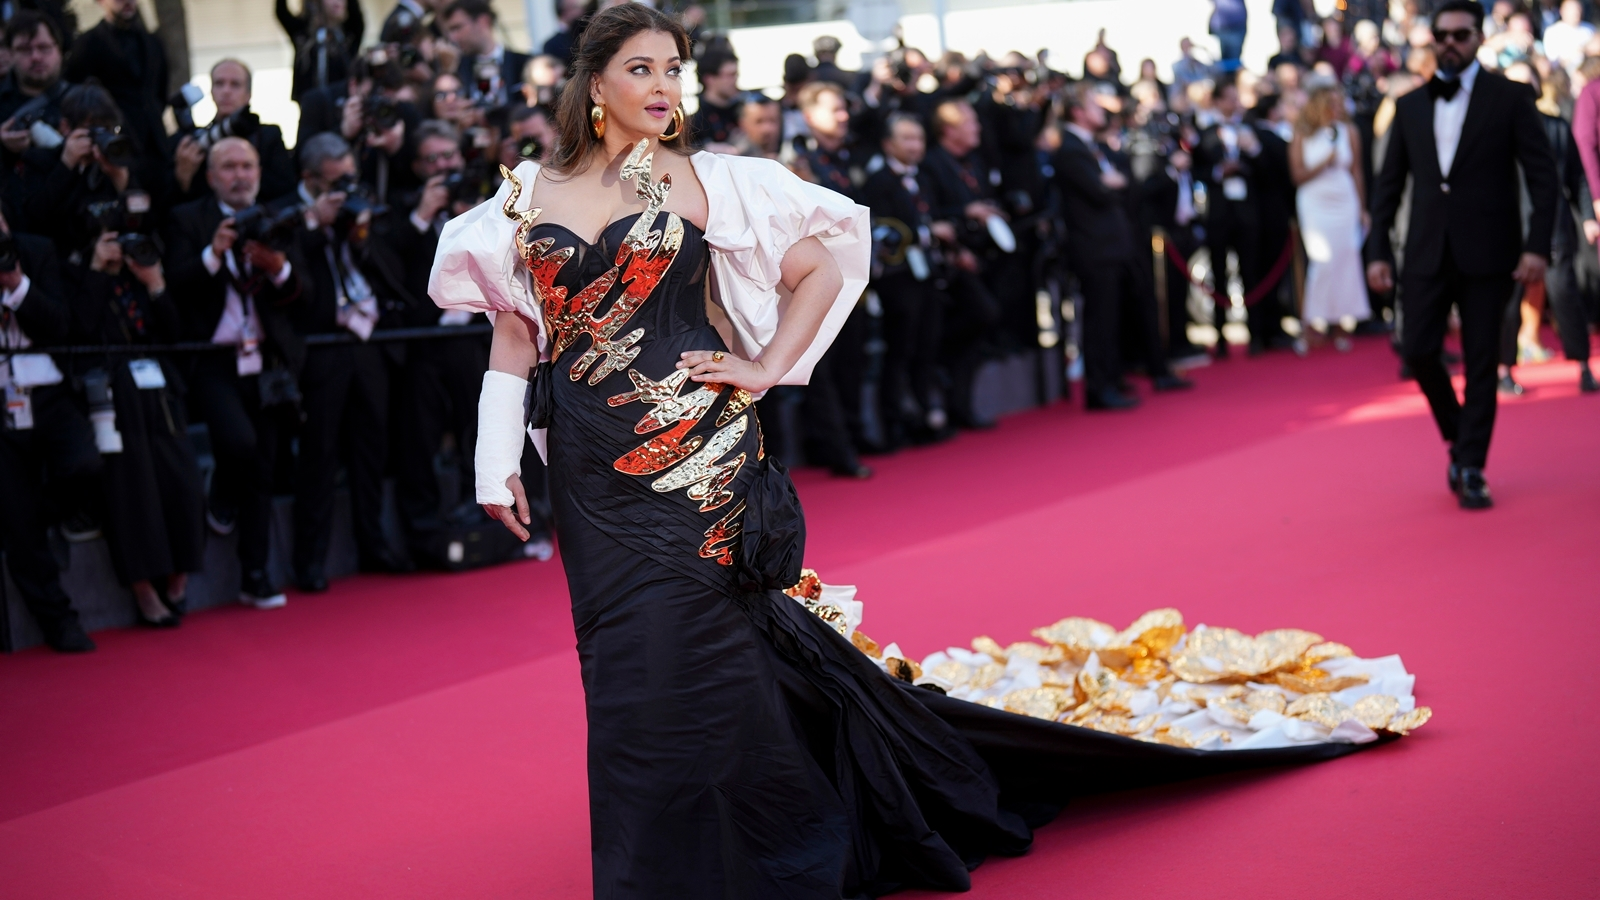 Aishwarya Rai Bachchan marks her arrival on Cannes red carpet in black